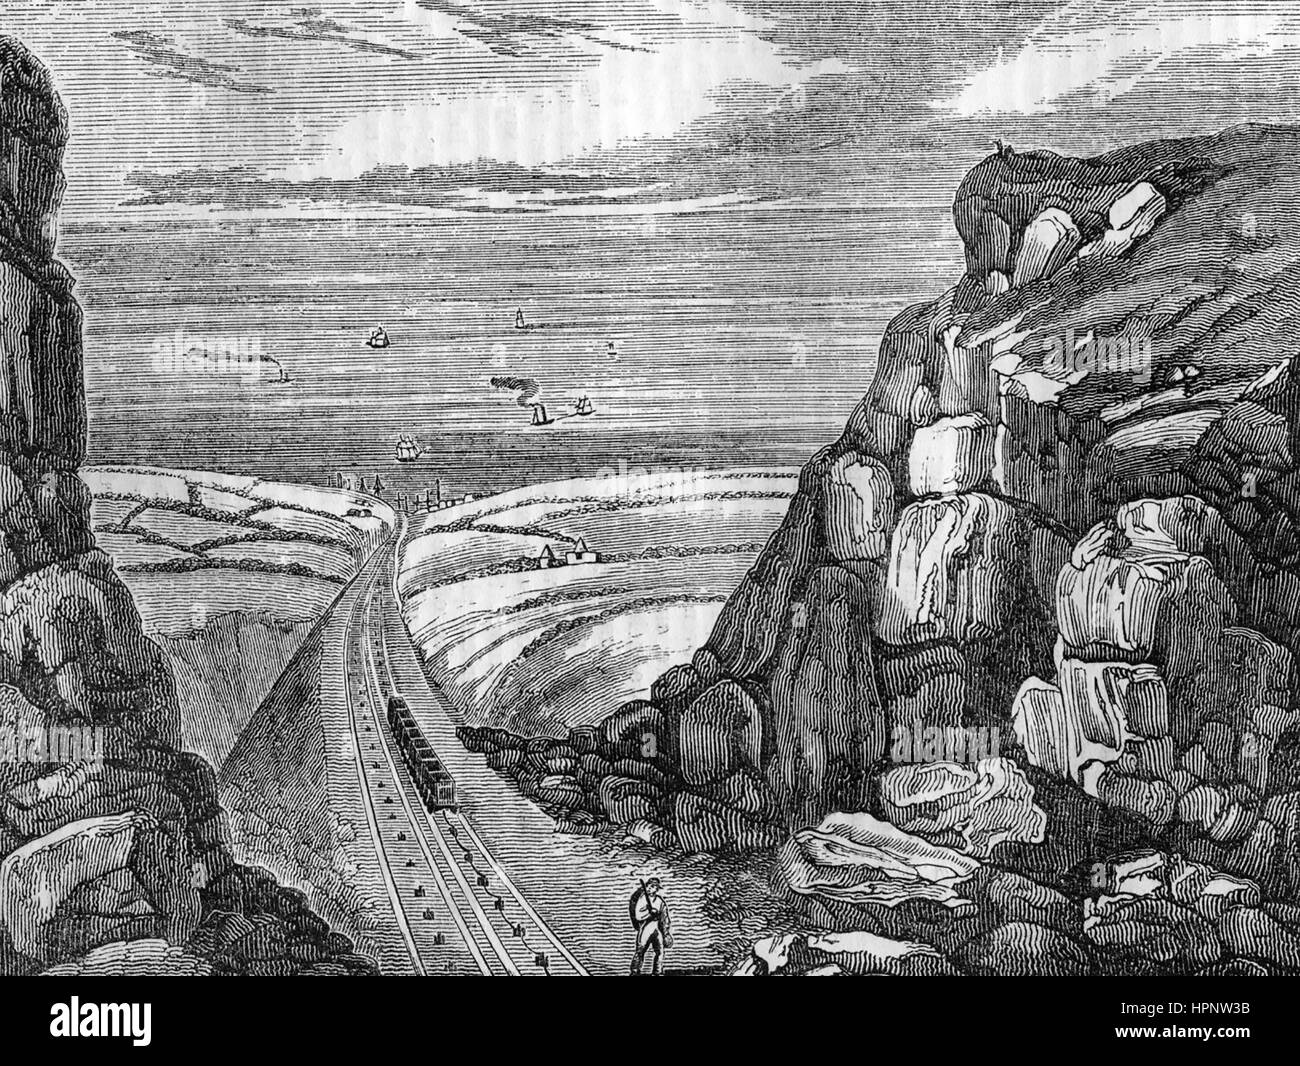 SEAHAM COLLIERY, Durham, England. The railway to Seaham Habour in an 1850 engraving showing empty trucks at right on a pully system  returning uphill to the mines after discharging their loads. Stock Photo